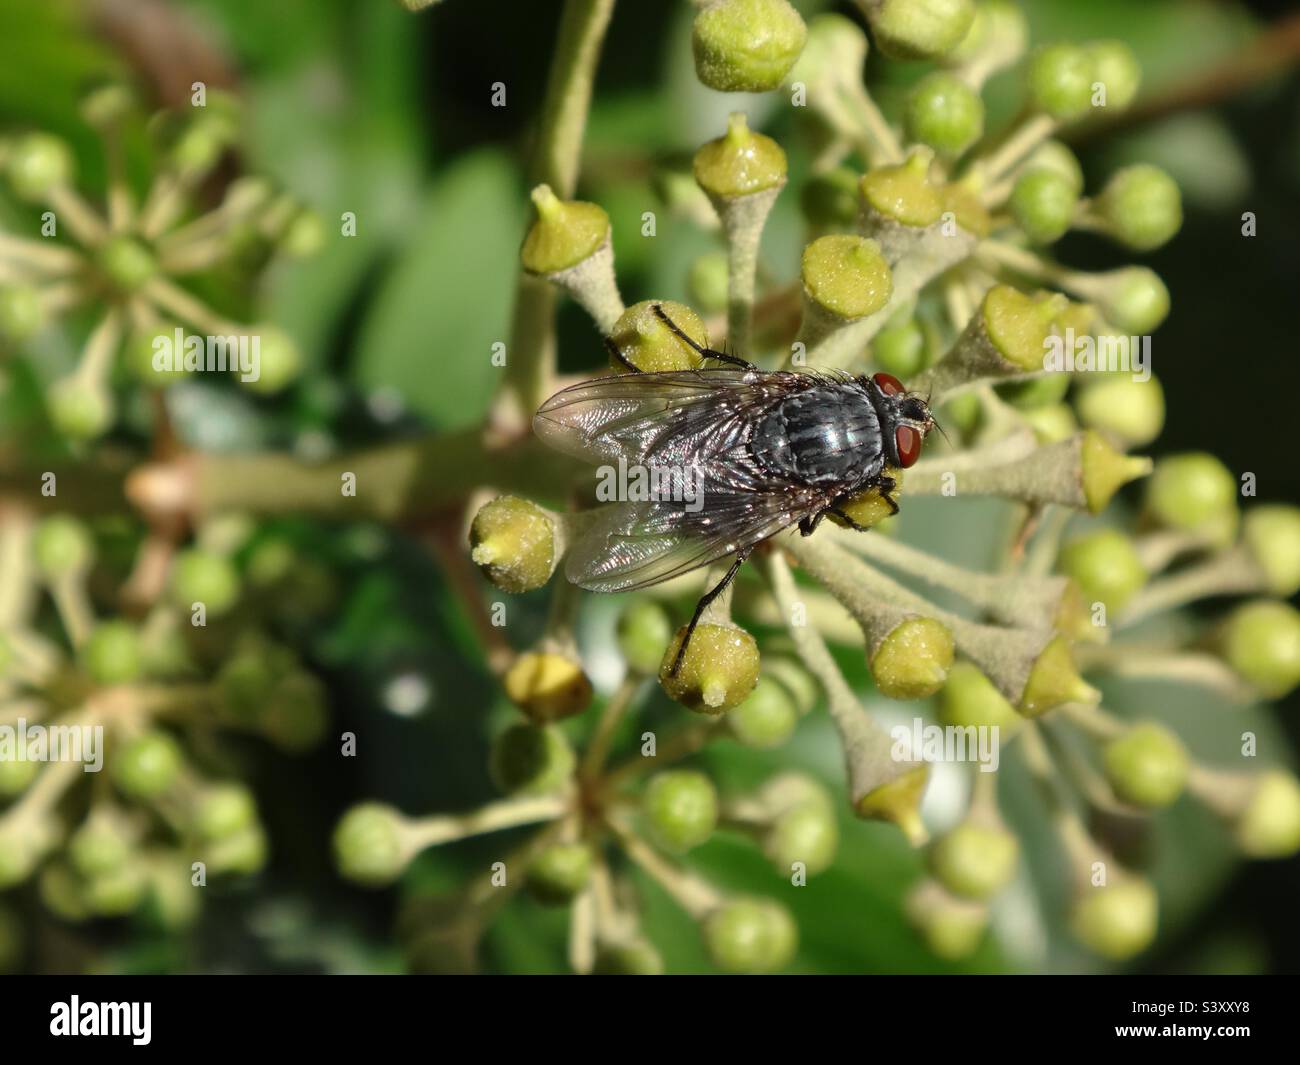 Blue bottle fly (Calliphora vicina) sitting on a cluster of green ivy flowers Stock Photo